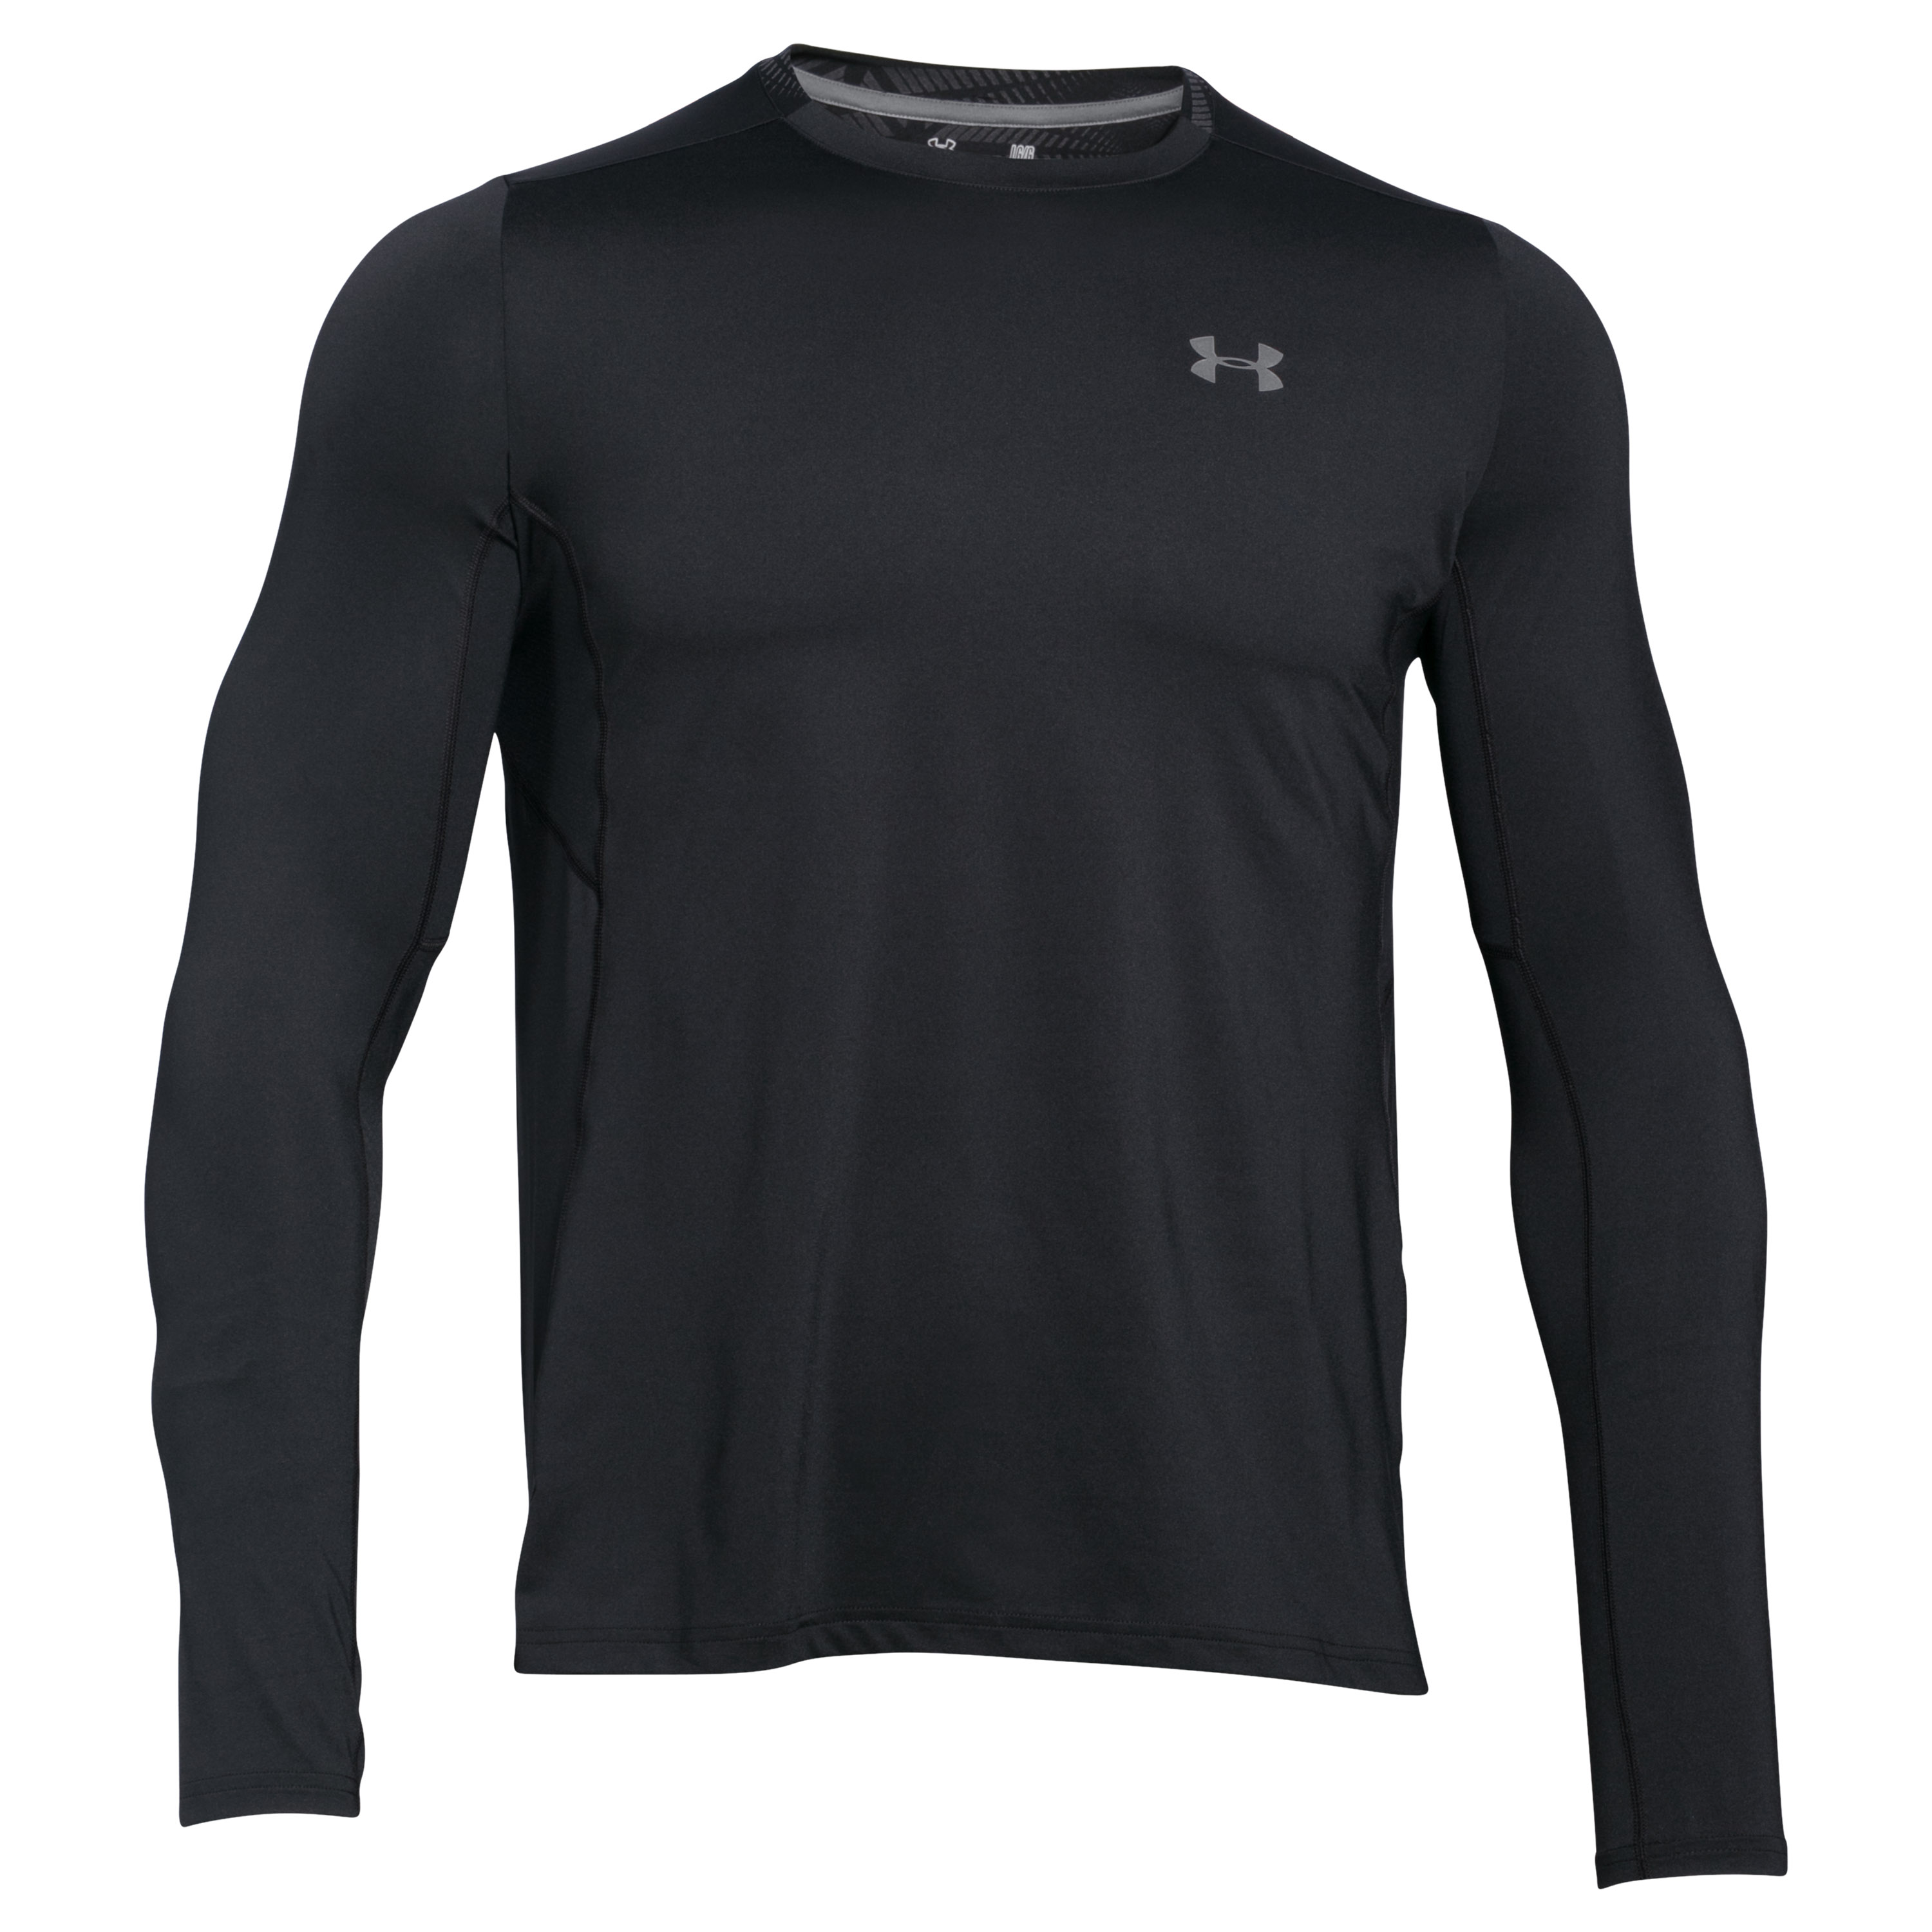 Under Armour Running Shirt CoolSwitch black